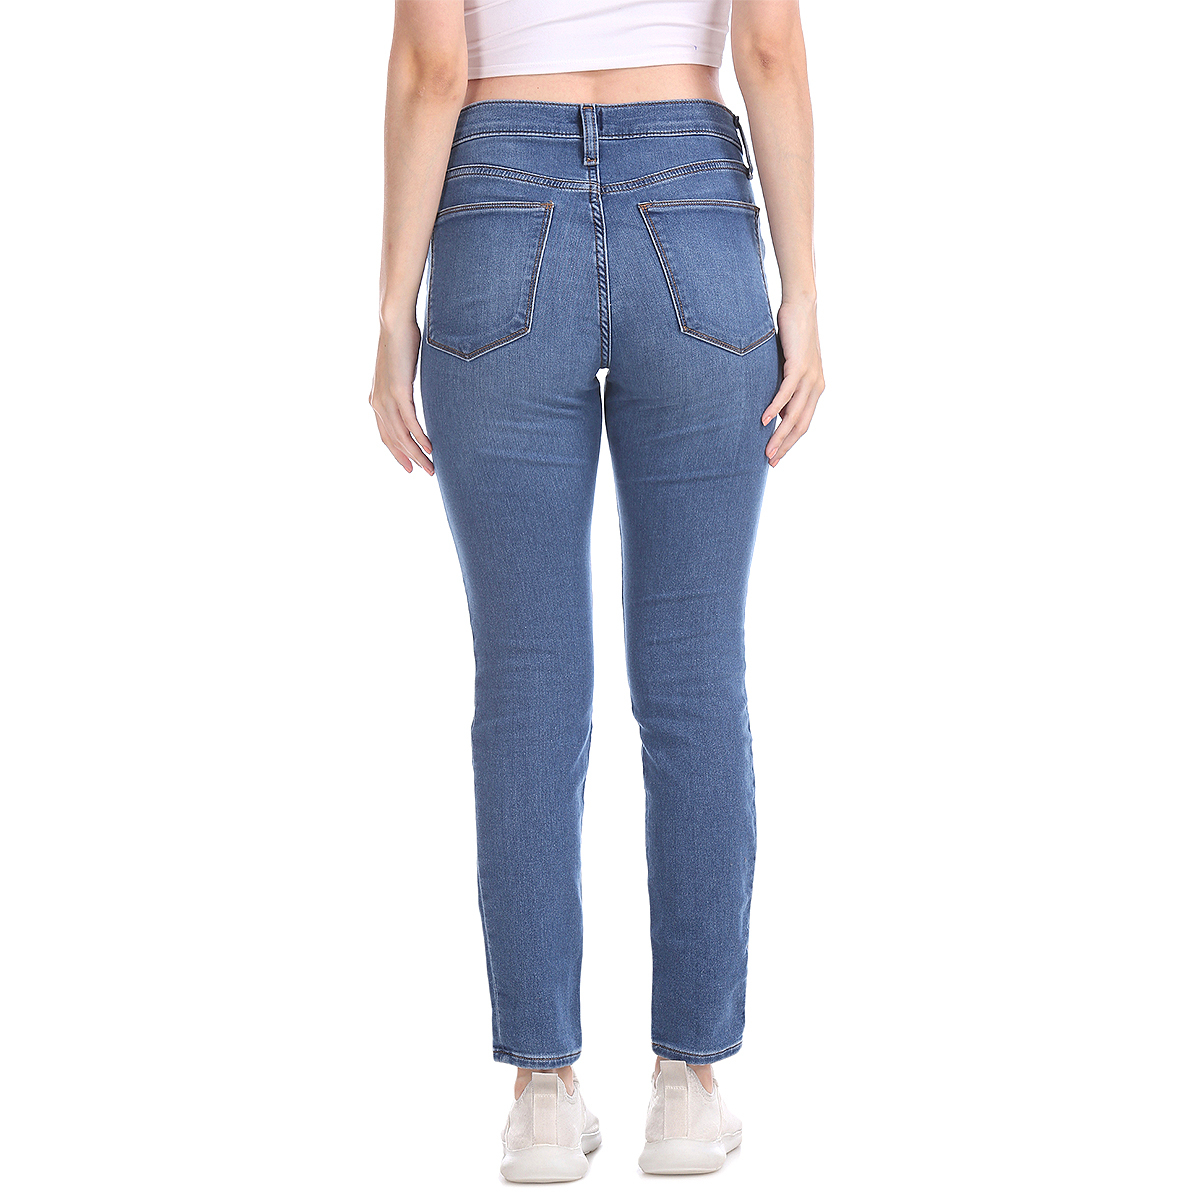 Gap Mid Rise Skinny Fit Full Length Stone Washed And Whiskered Jeans - Blue, Size-30